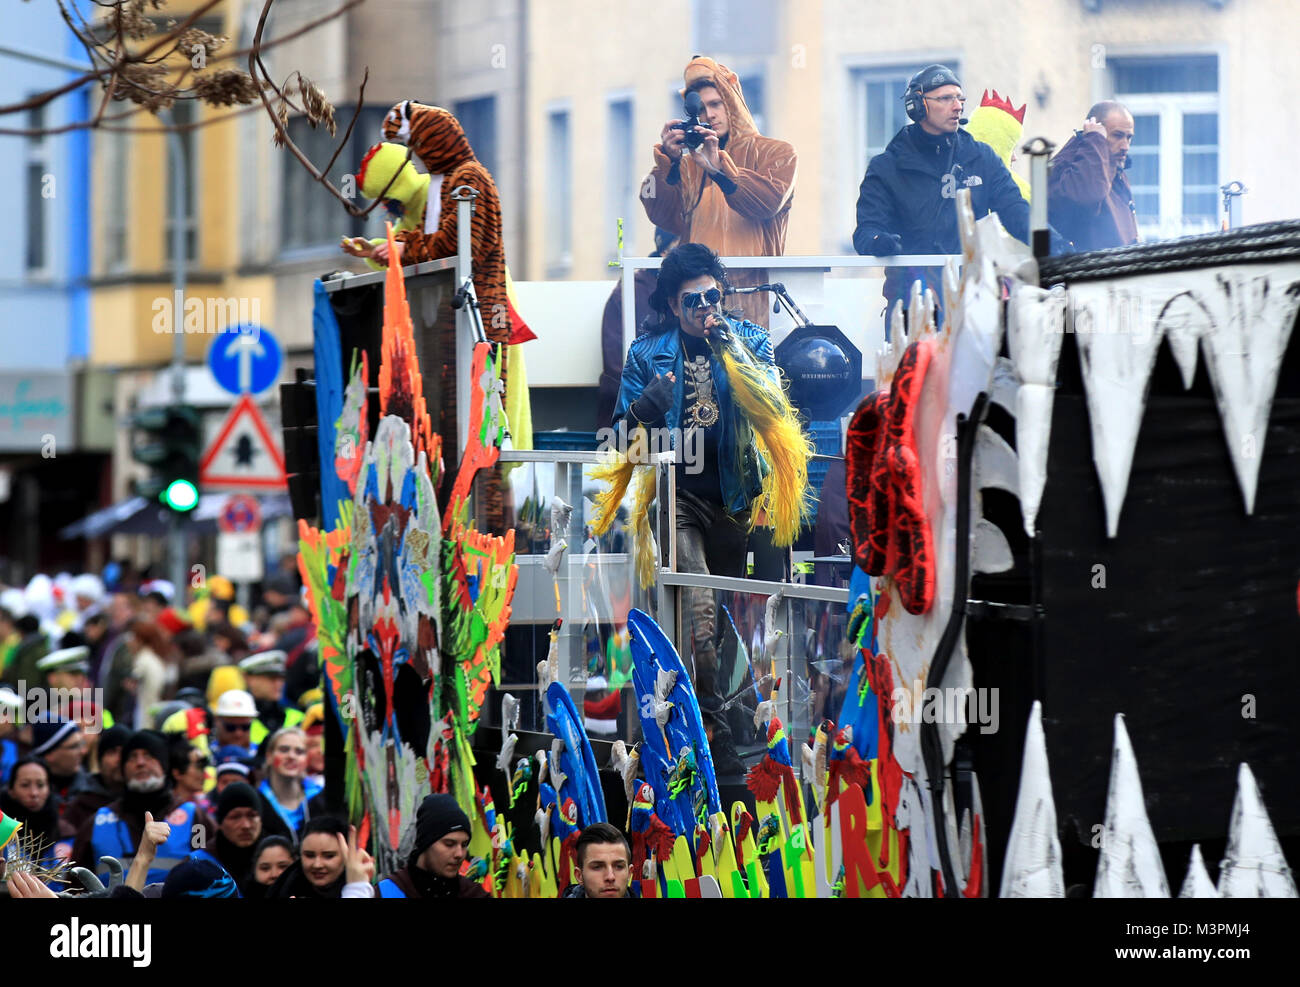 The German band 'Die Toten Hosen' (lit. The Dead Trousers) performs during  a live concert on a caricature float at the Rosenmontag (Shrove Monday)  carnival procession in Duesseldorf, Germany, 12 Febraury 2018.